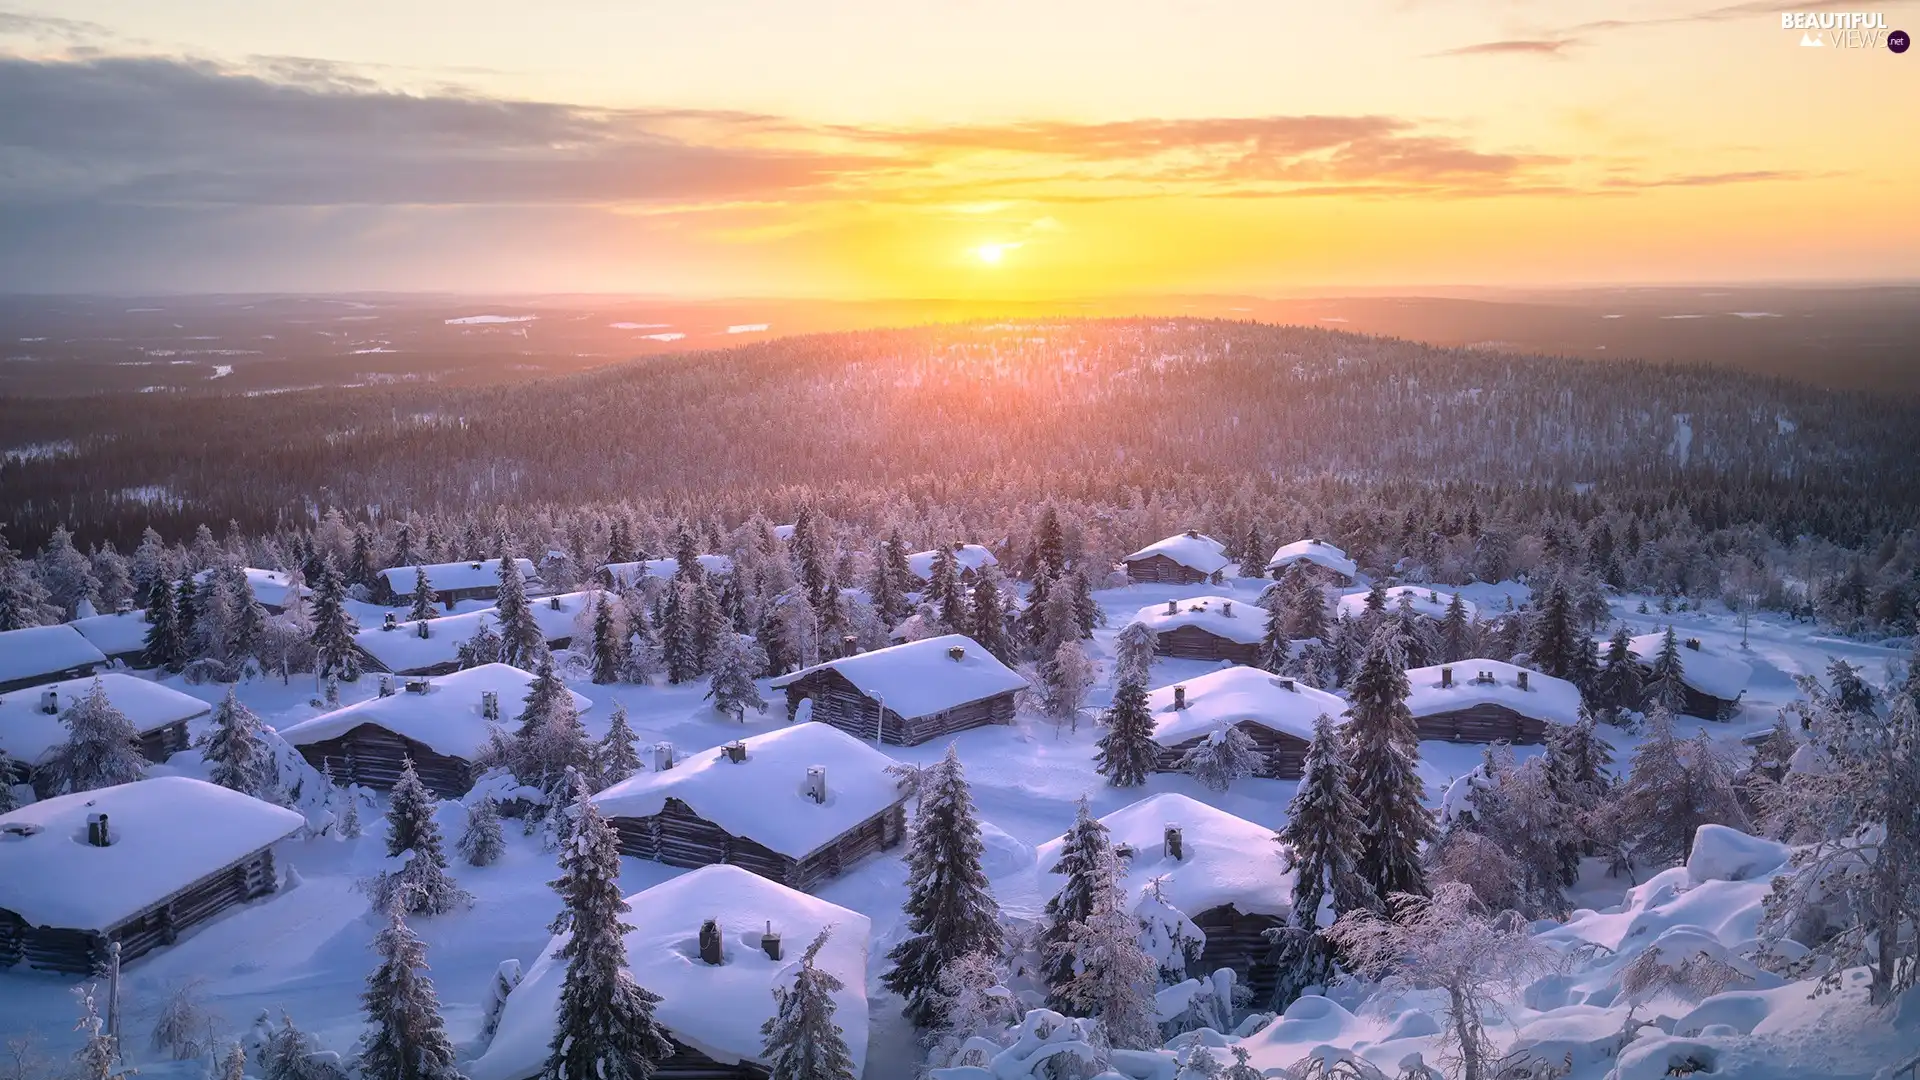 Mountains, winter, trees, viewes, Houses, Sunrise